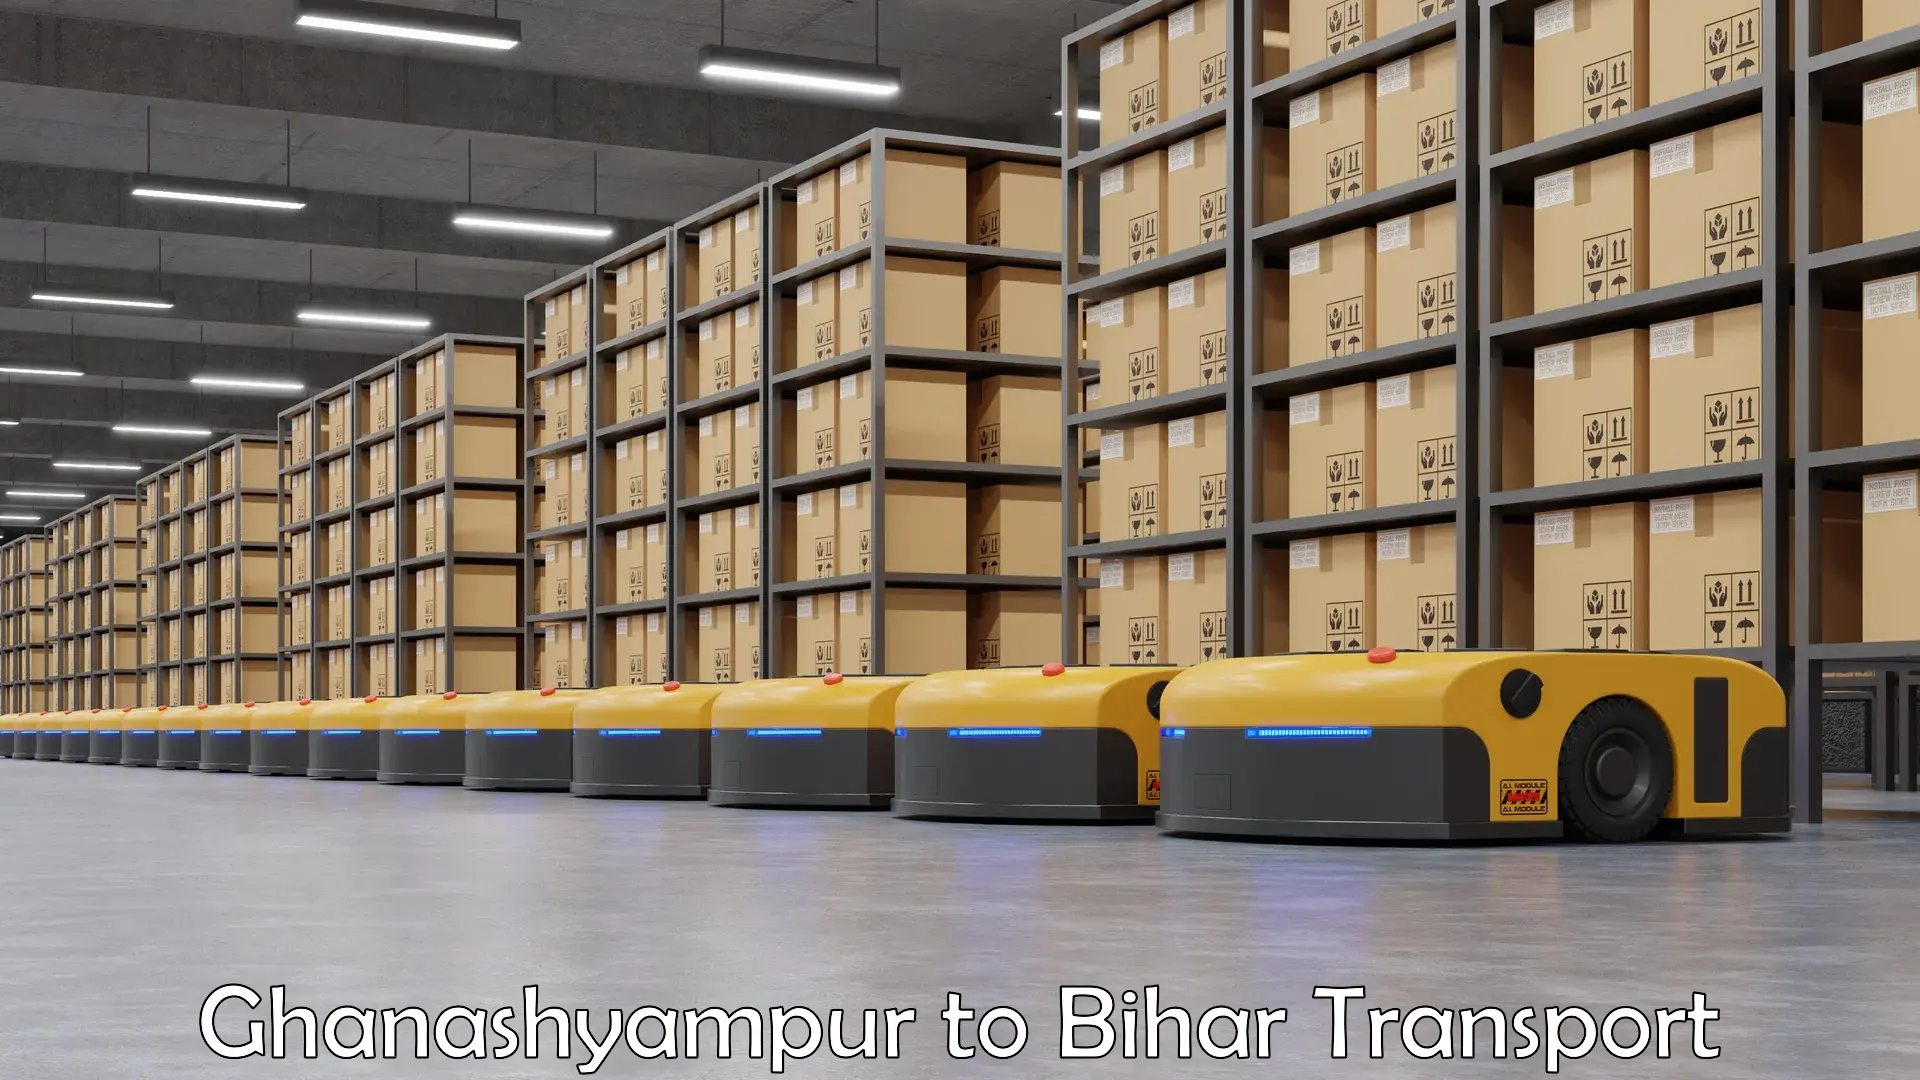 Shipping services Ghanashyampur to Bankipore